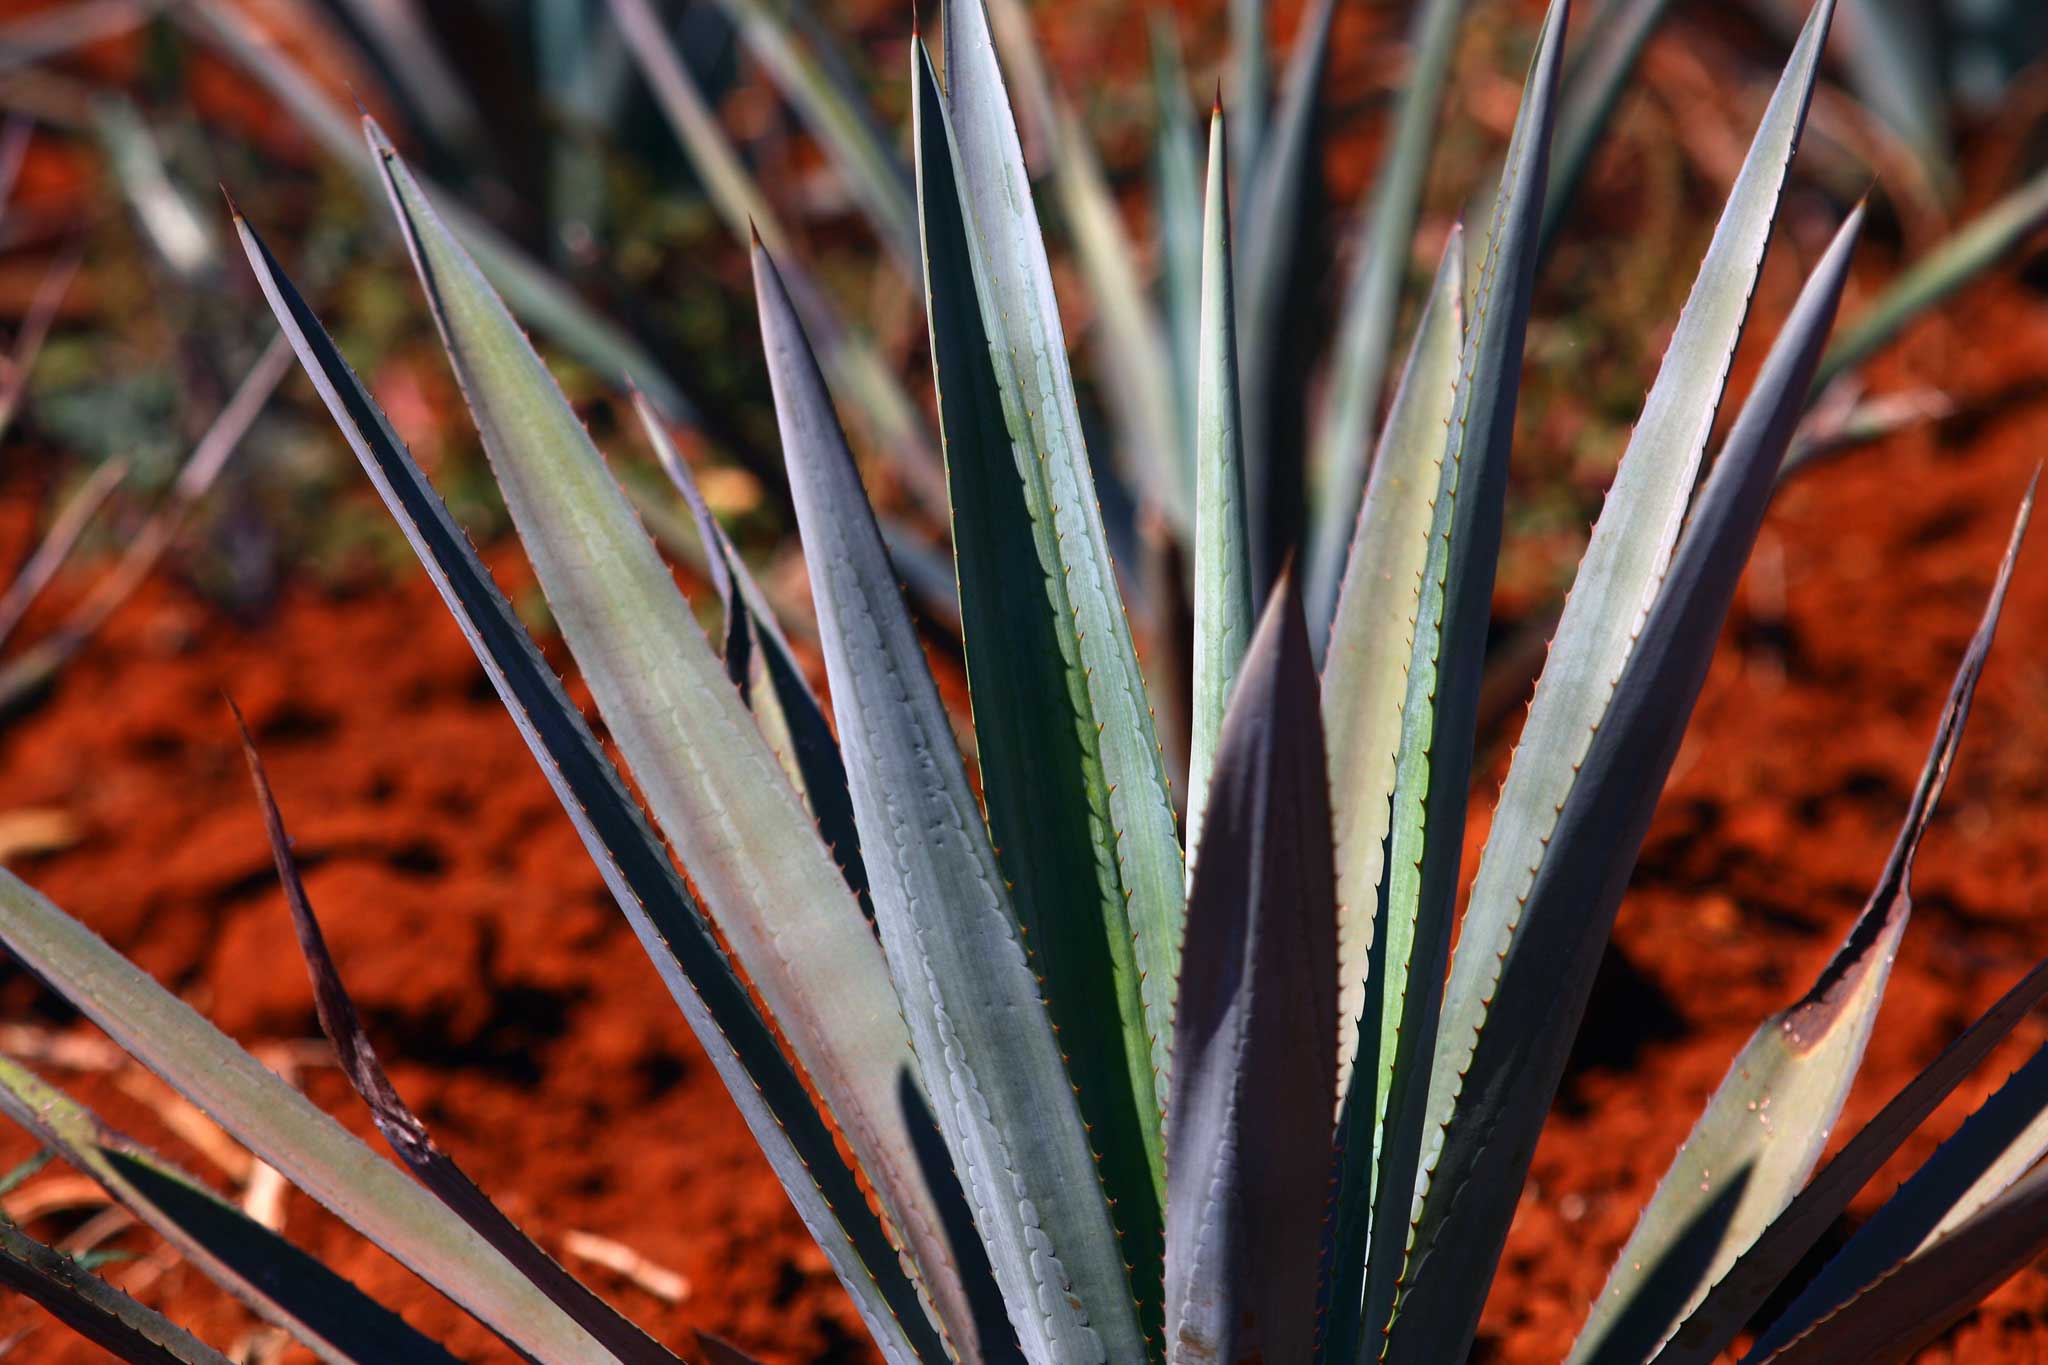 Prickly customer: The Mexican agave plant, a source of fermented beverages, including tequila, for centuries